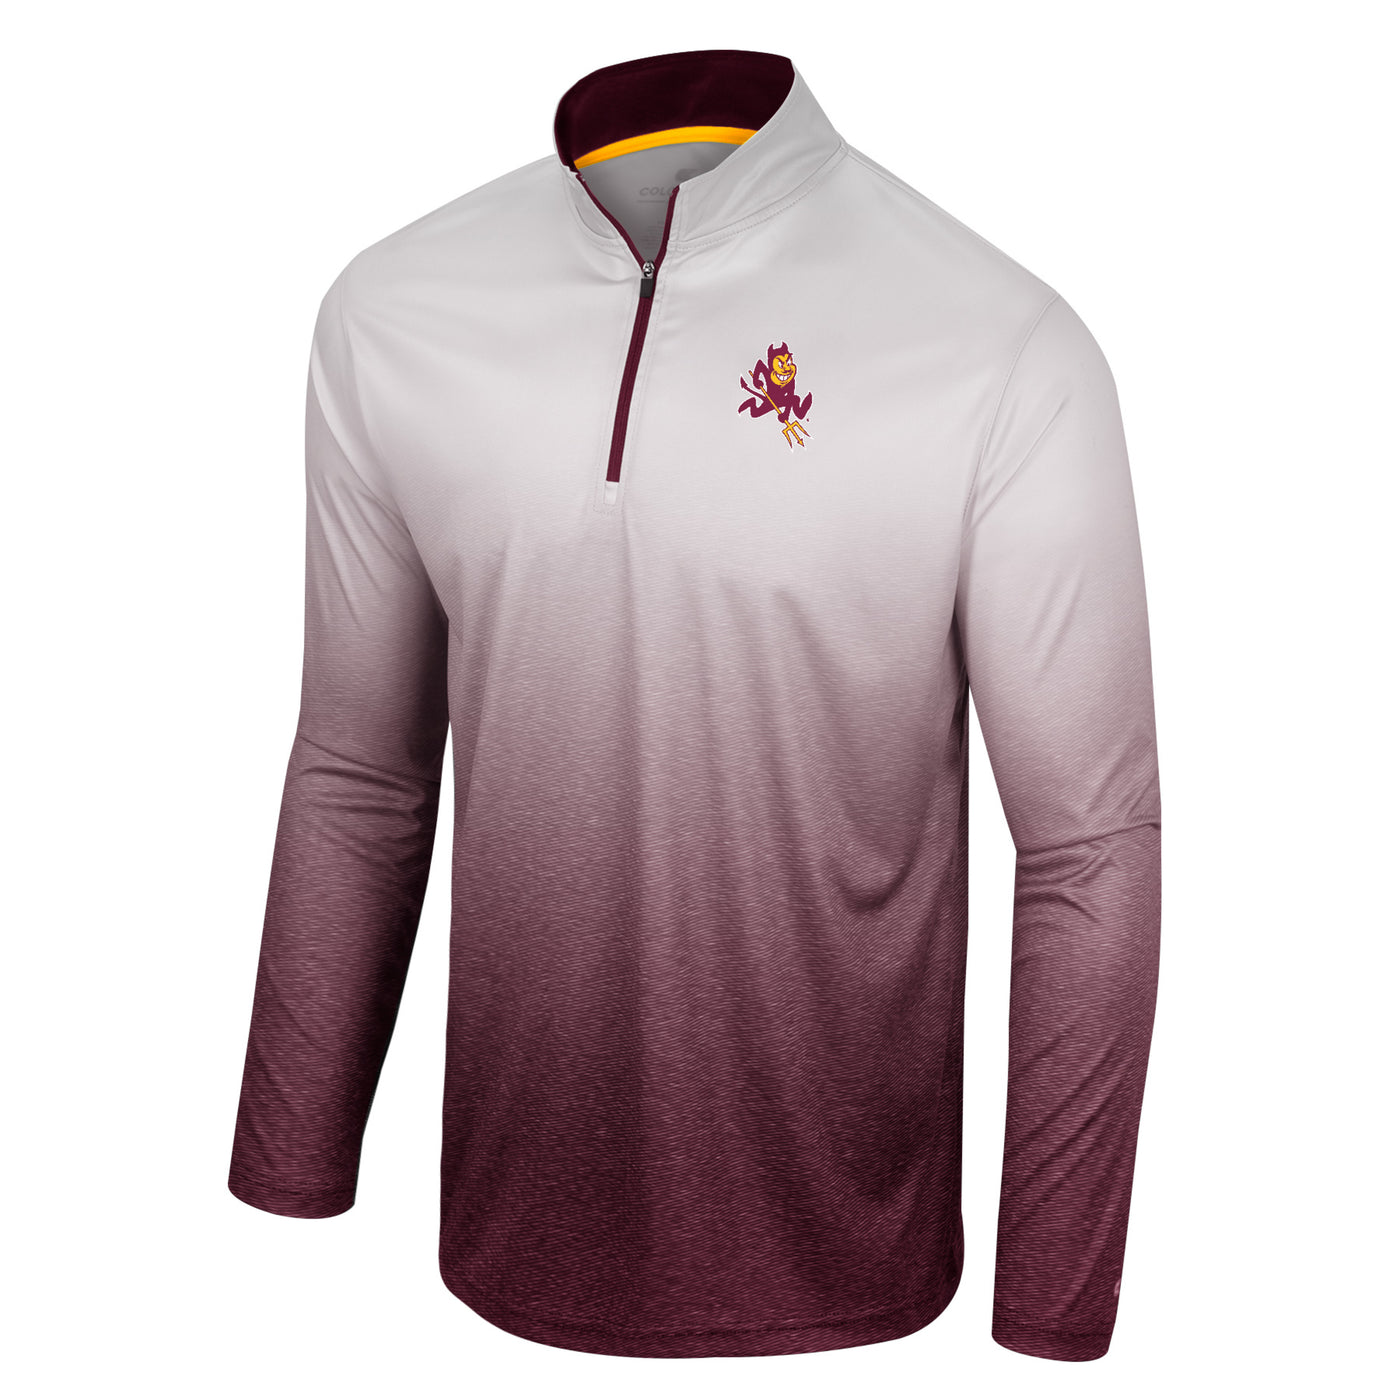 Mens athletic long sleeve shirt with a quarter length zipper and a mock neck collar. It is an ombre coloring from white at the top to maroon at the bottom. There is a small sparky mascot on the chest..